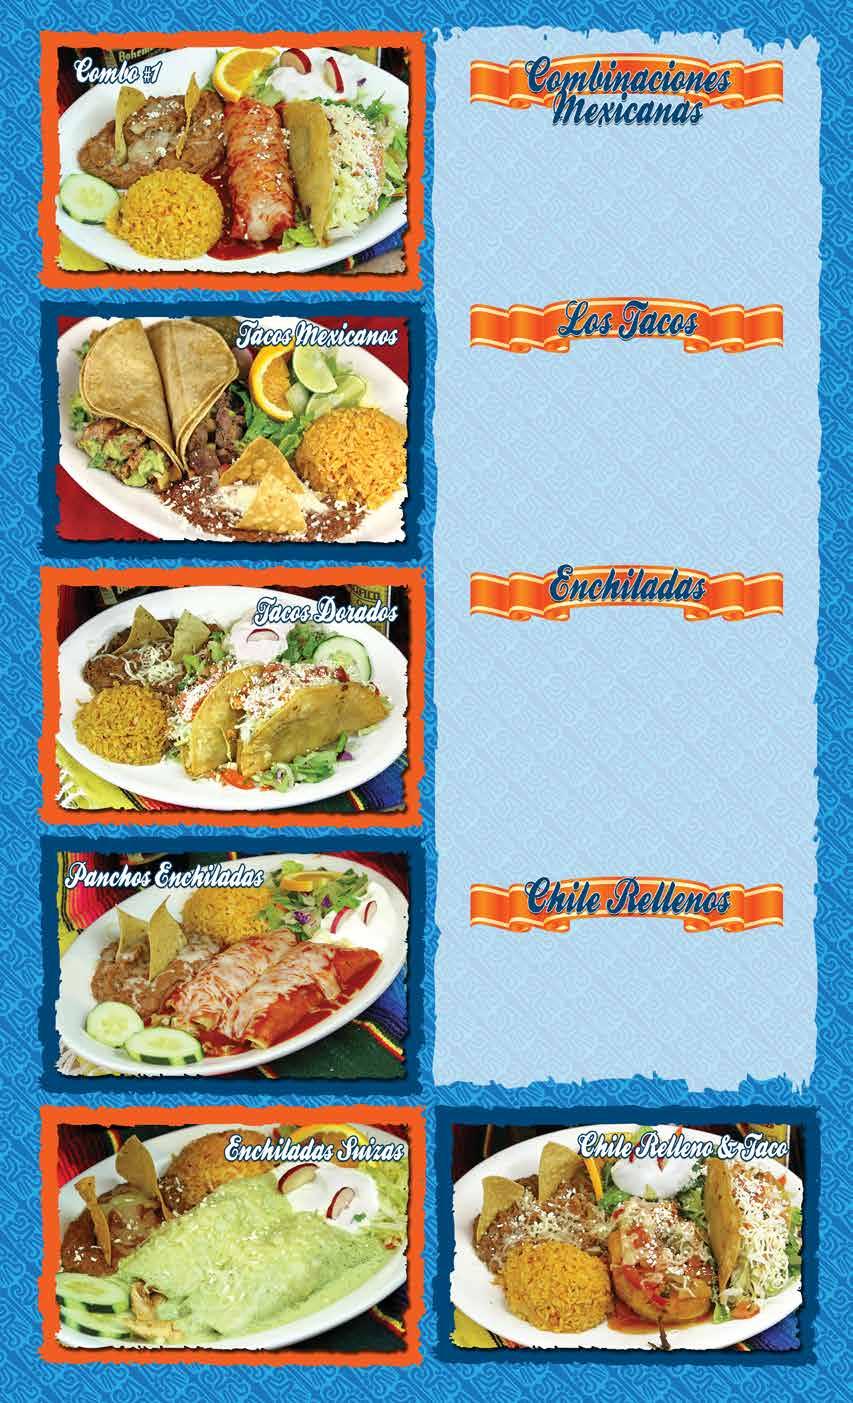 1 2 3 4 All Combinations are served with Mexican rice, sour cream and beans Shredded Beef Taco & Cheese Enchilada...16 Chile Relleno & Cheese Enchilada...16 Chicken Enchilada, & Chicken Taco.